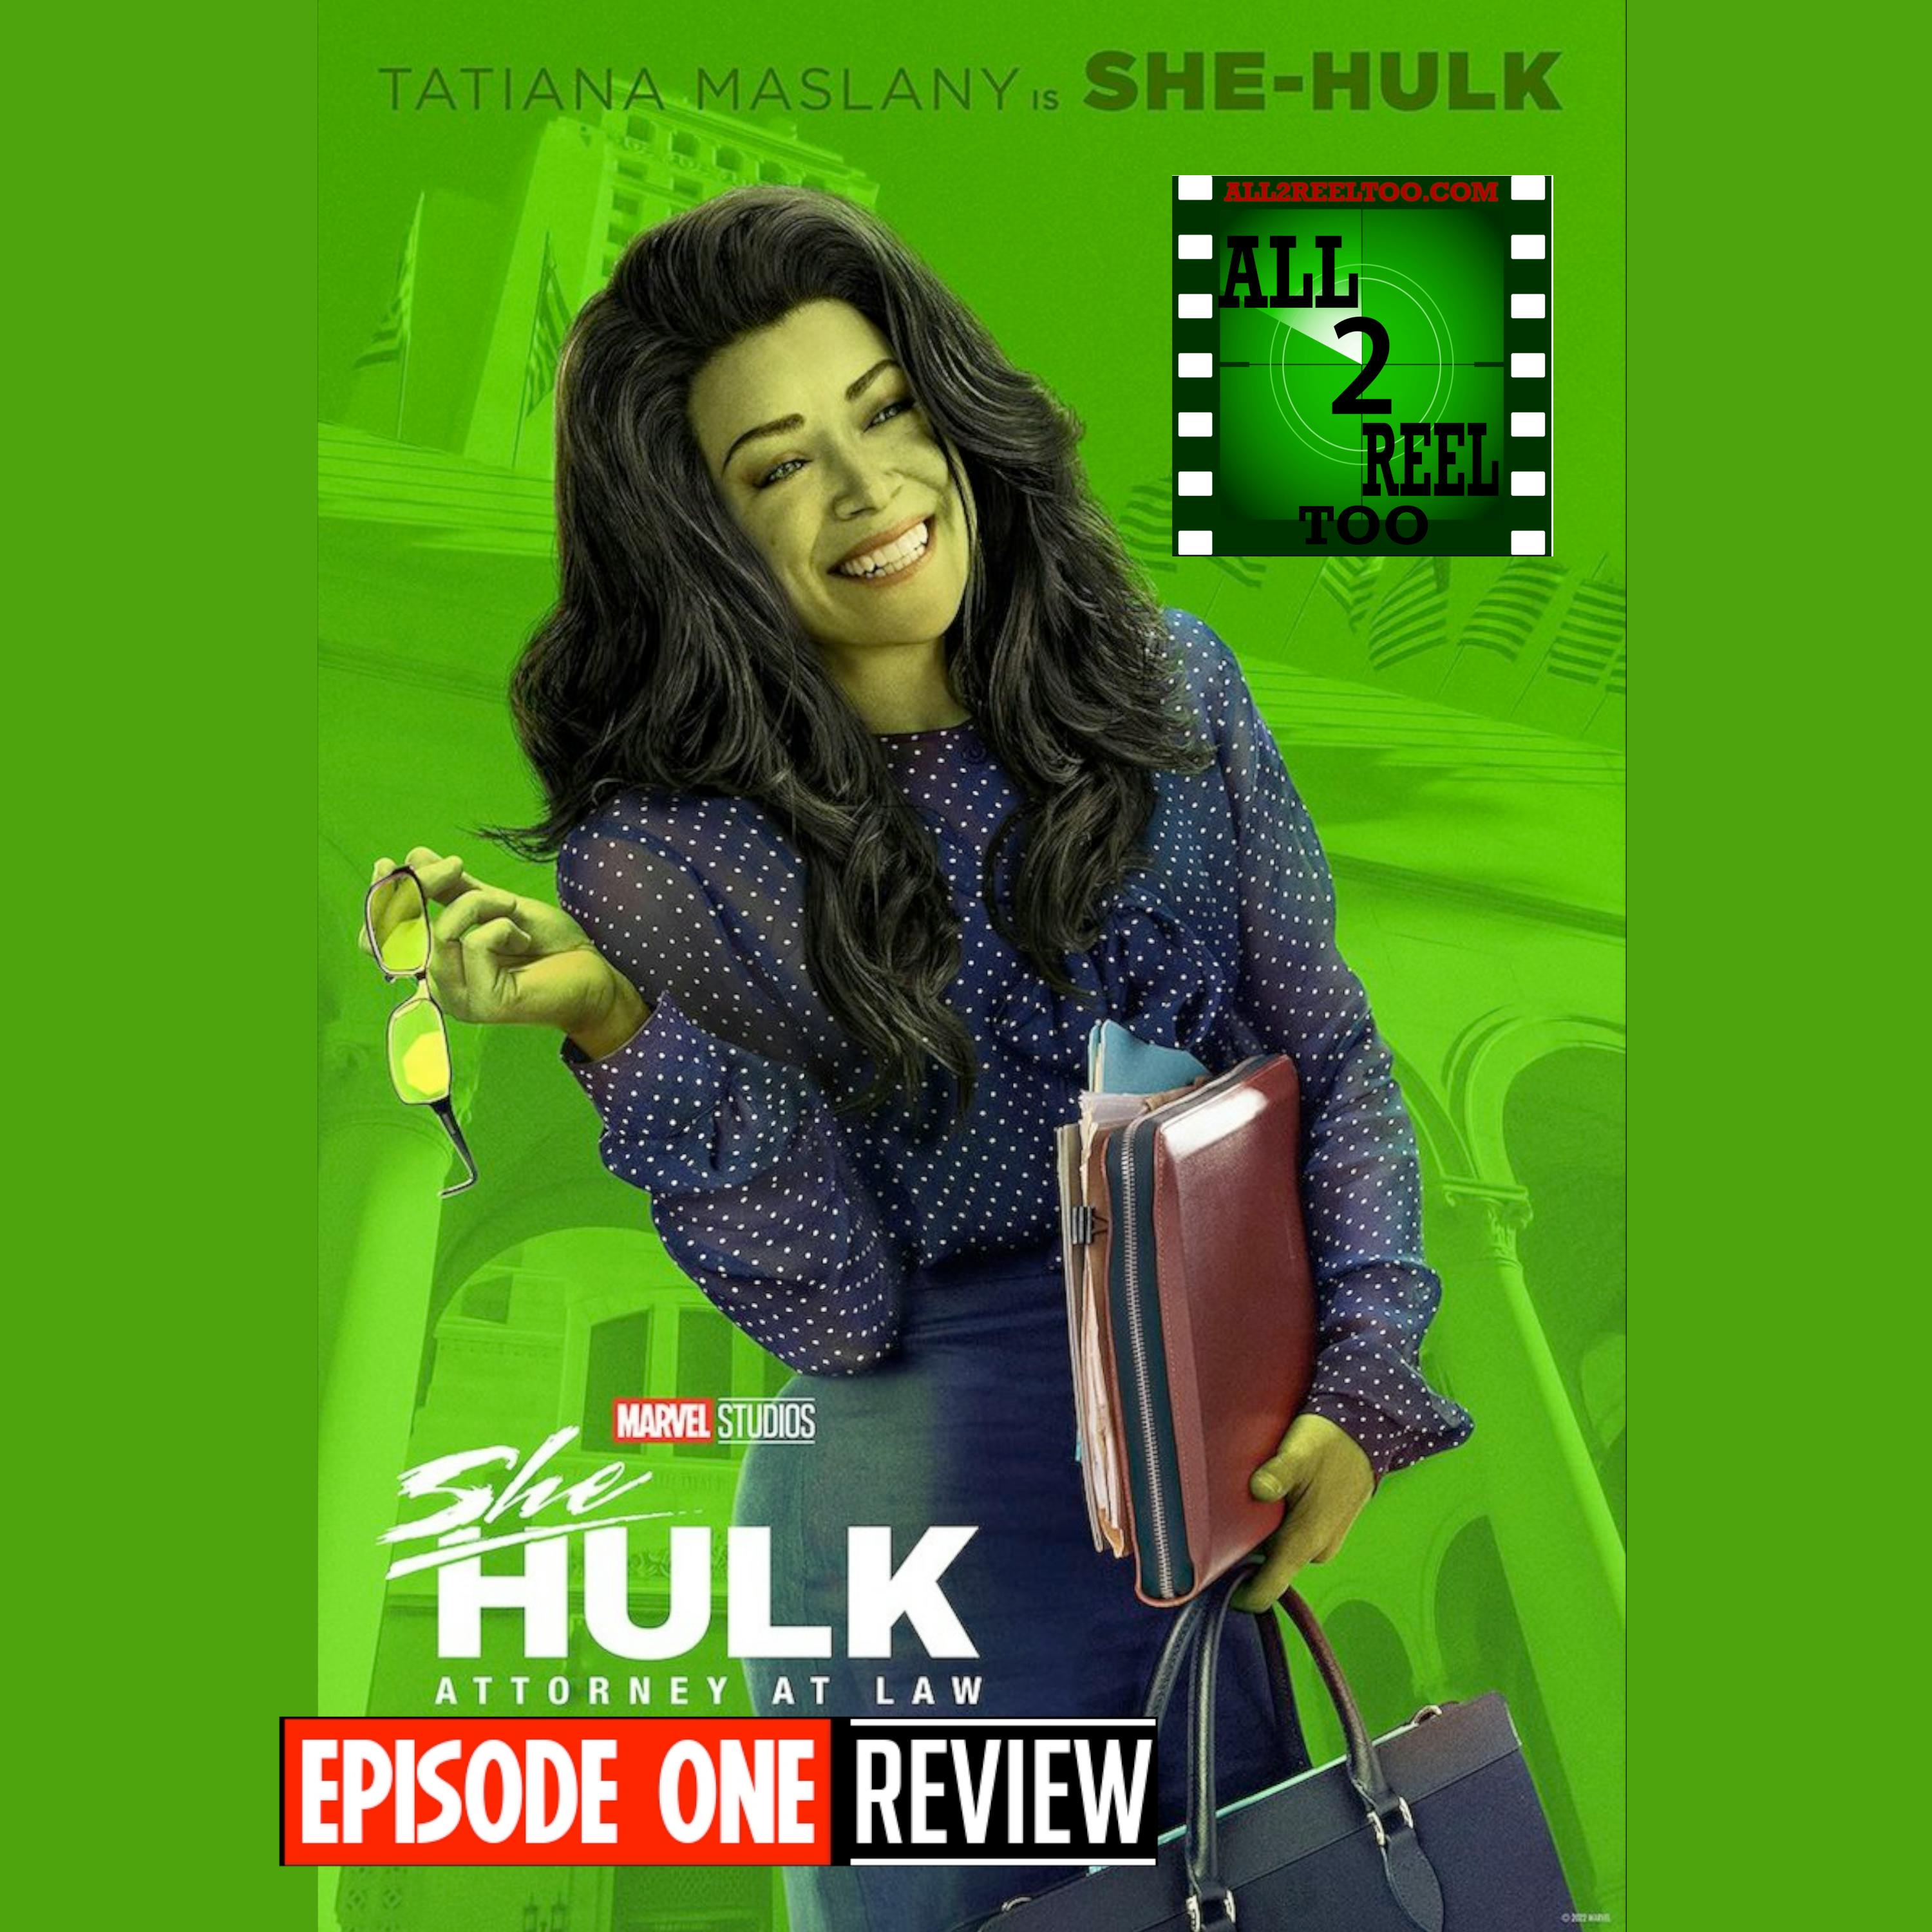 She-Hulk: Attorney at Law - EPISODE 1 REVIEW